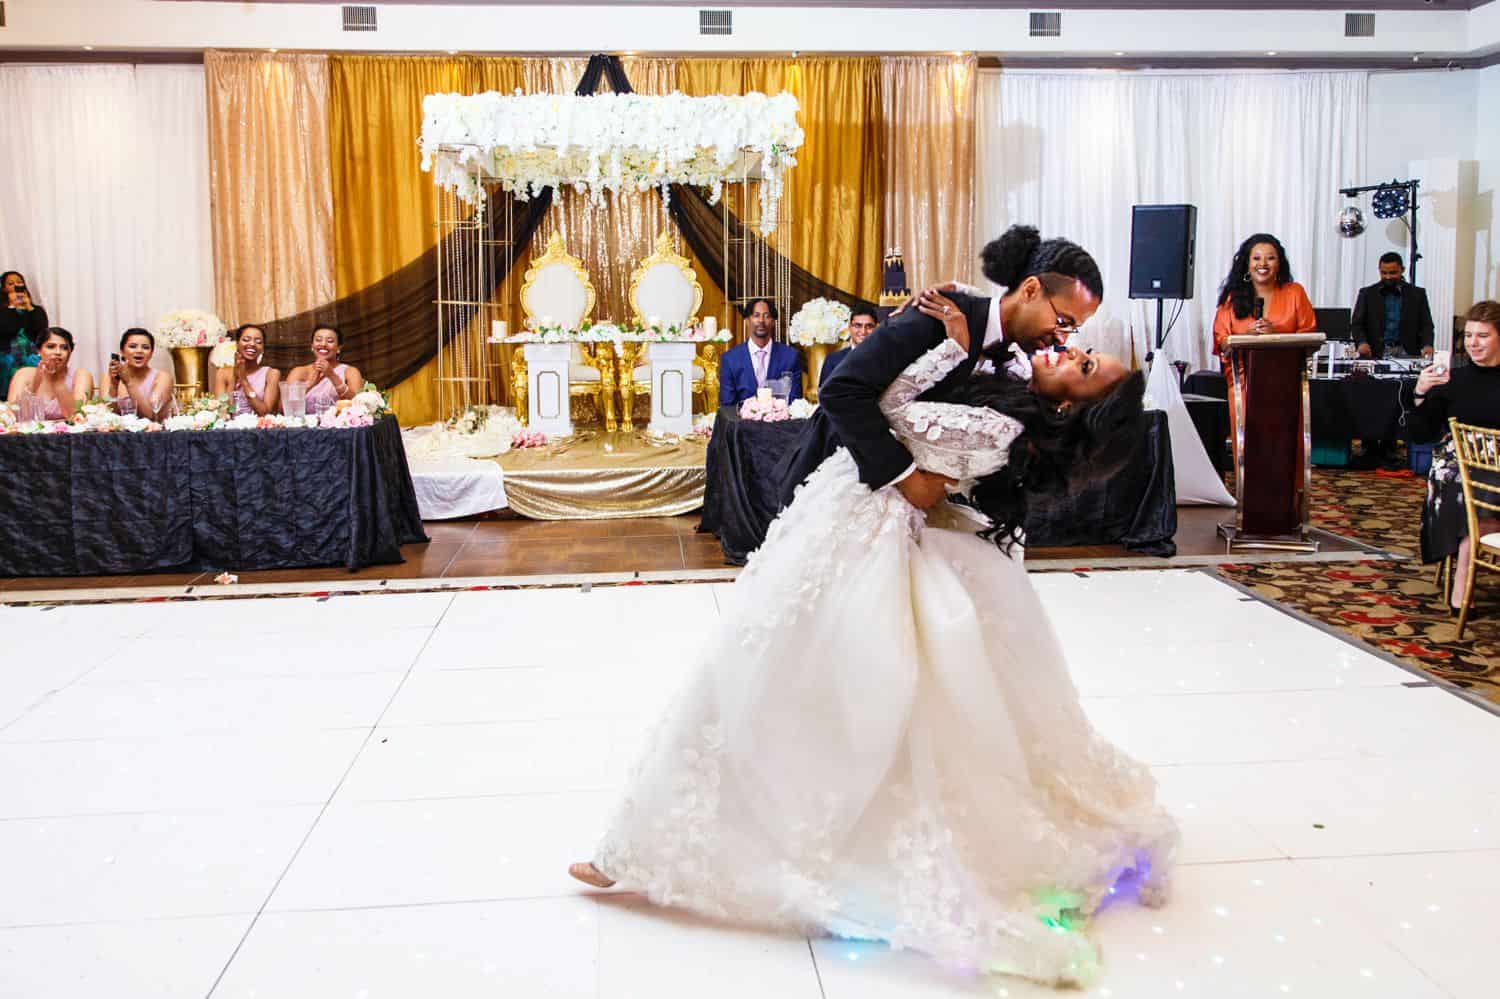 A groom dips the bride during their first dance in a ballroom